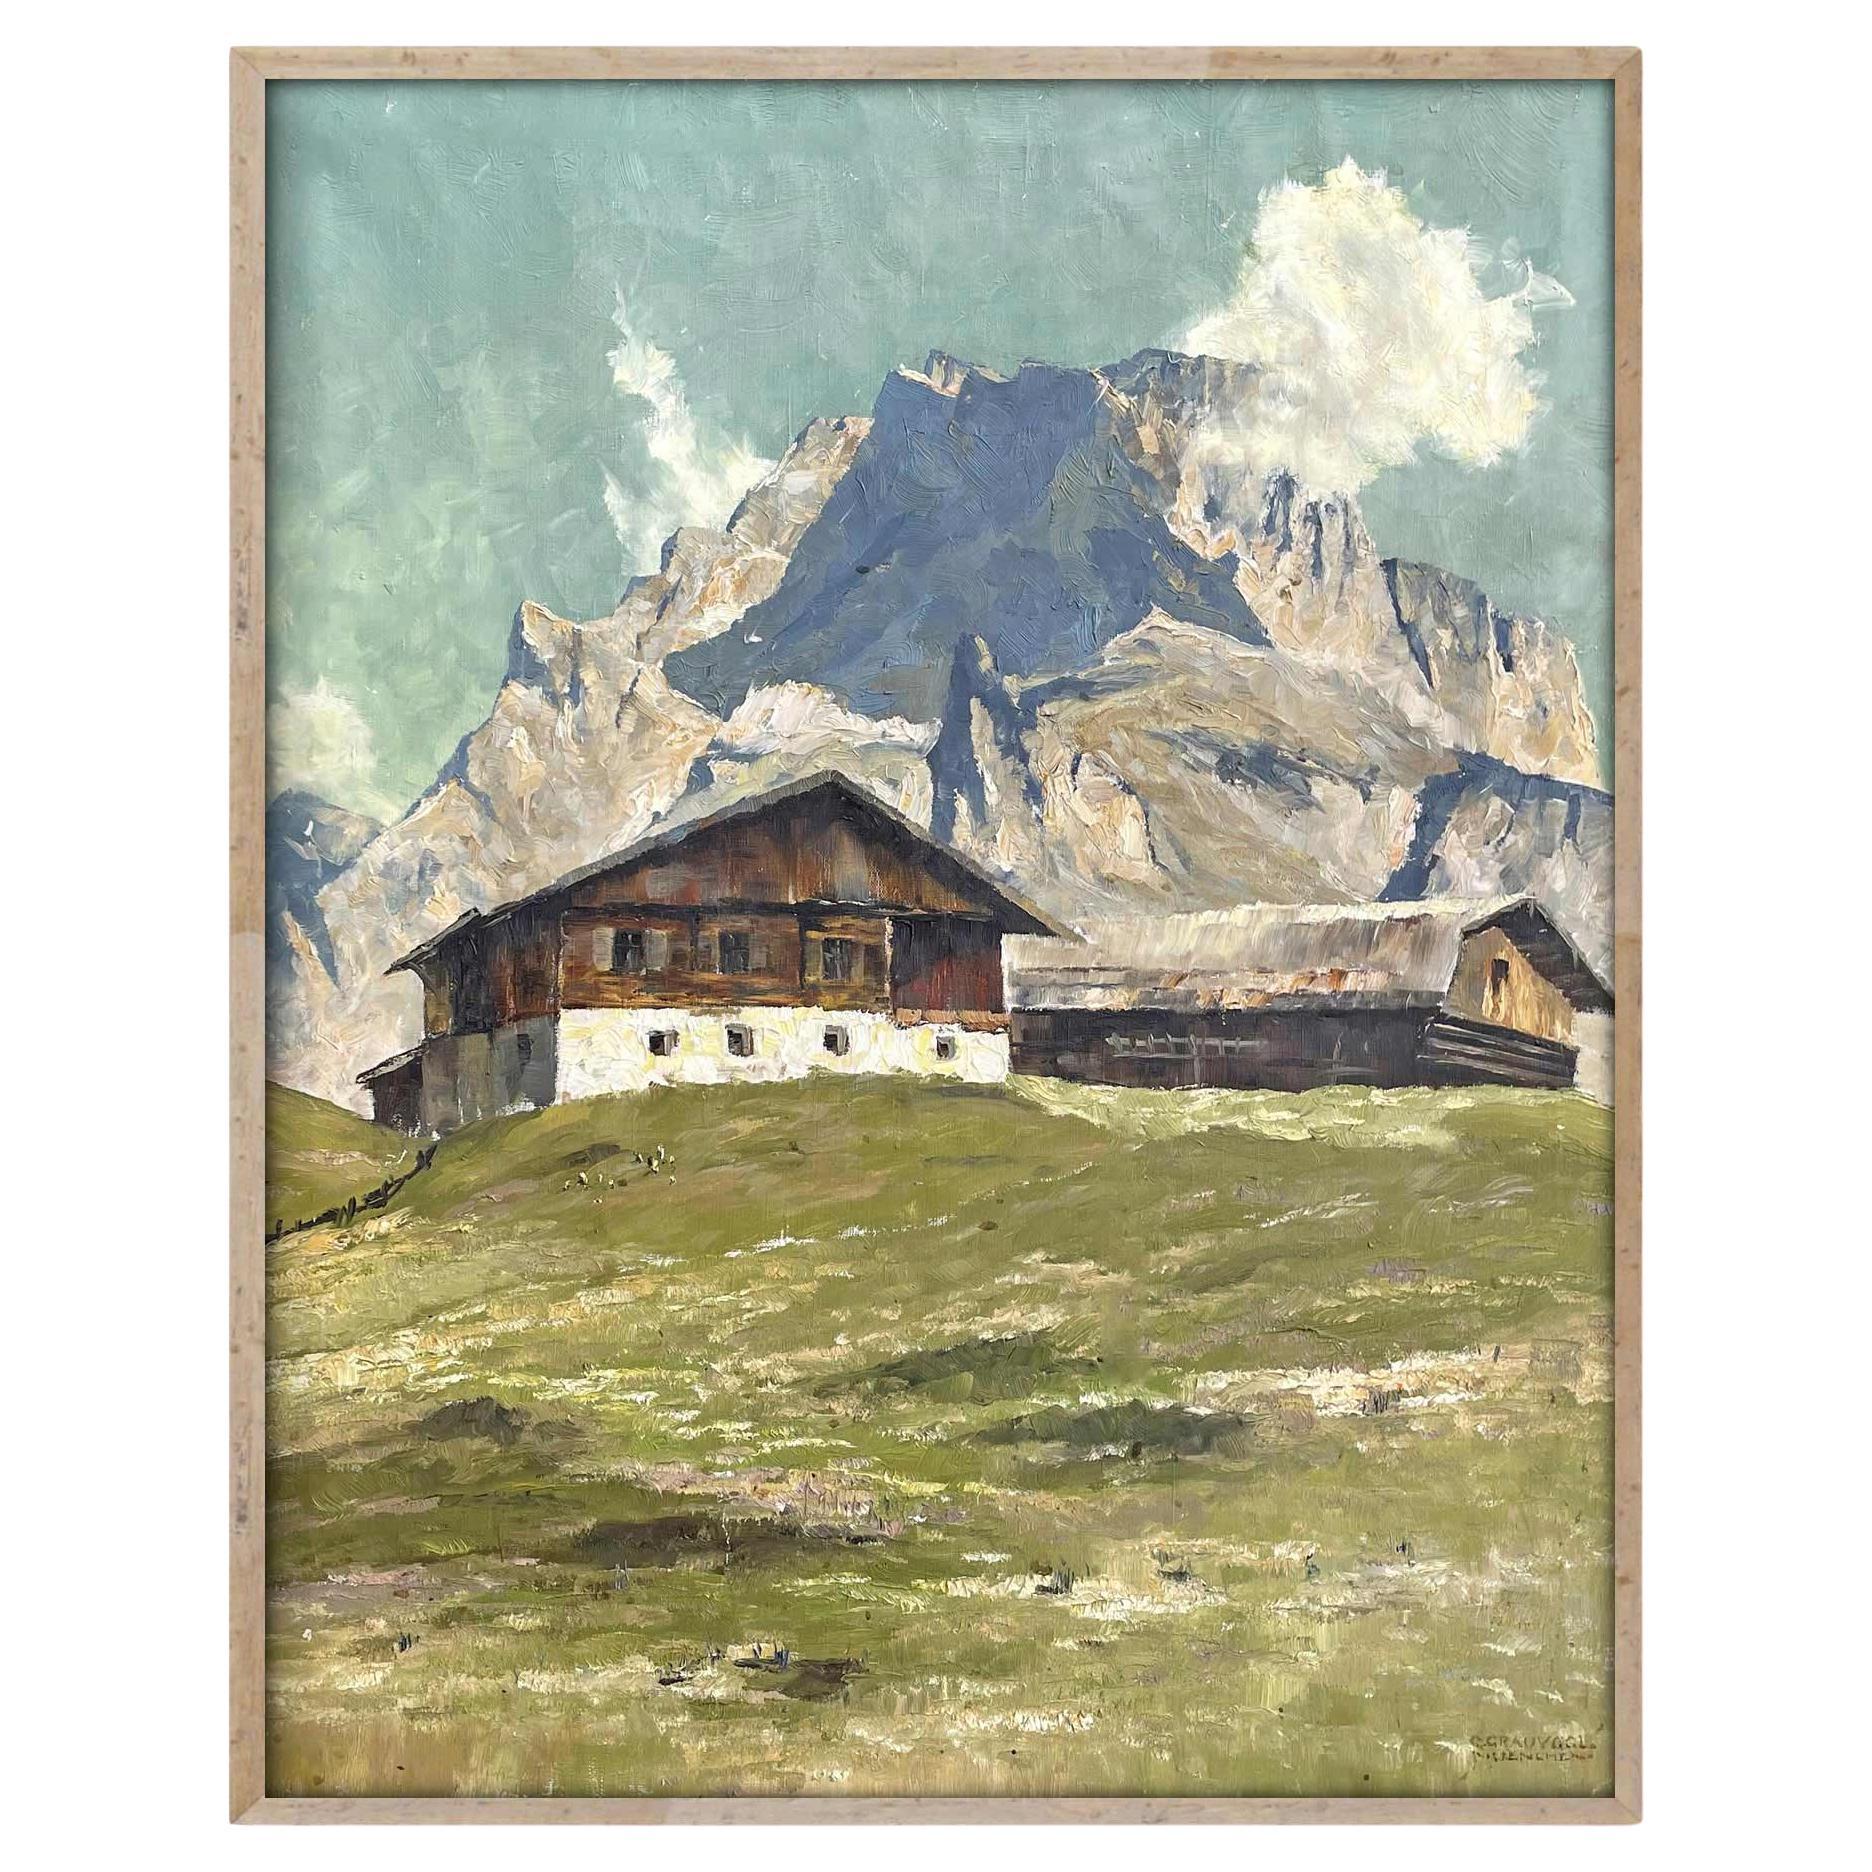 View of Gardena Pass Italian Dolomites Oil on Canvas by Georg Grauvogl 